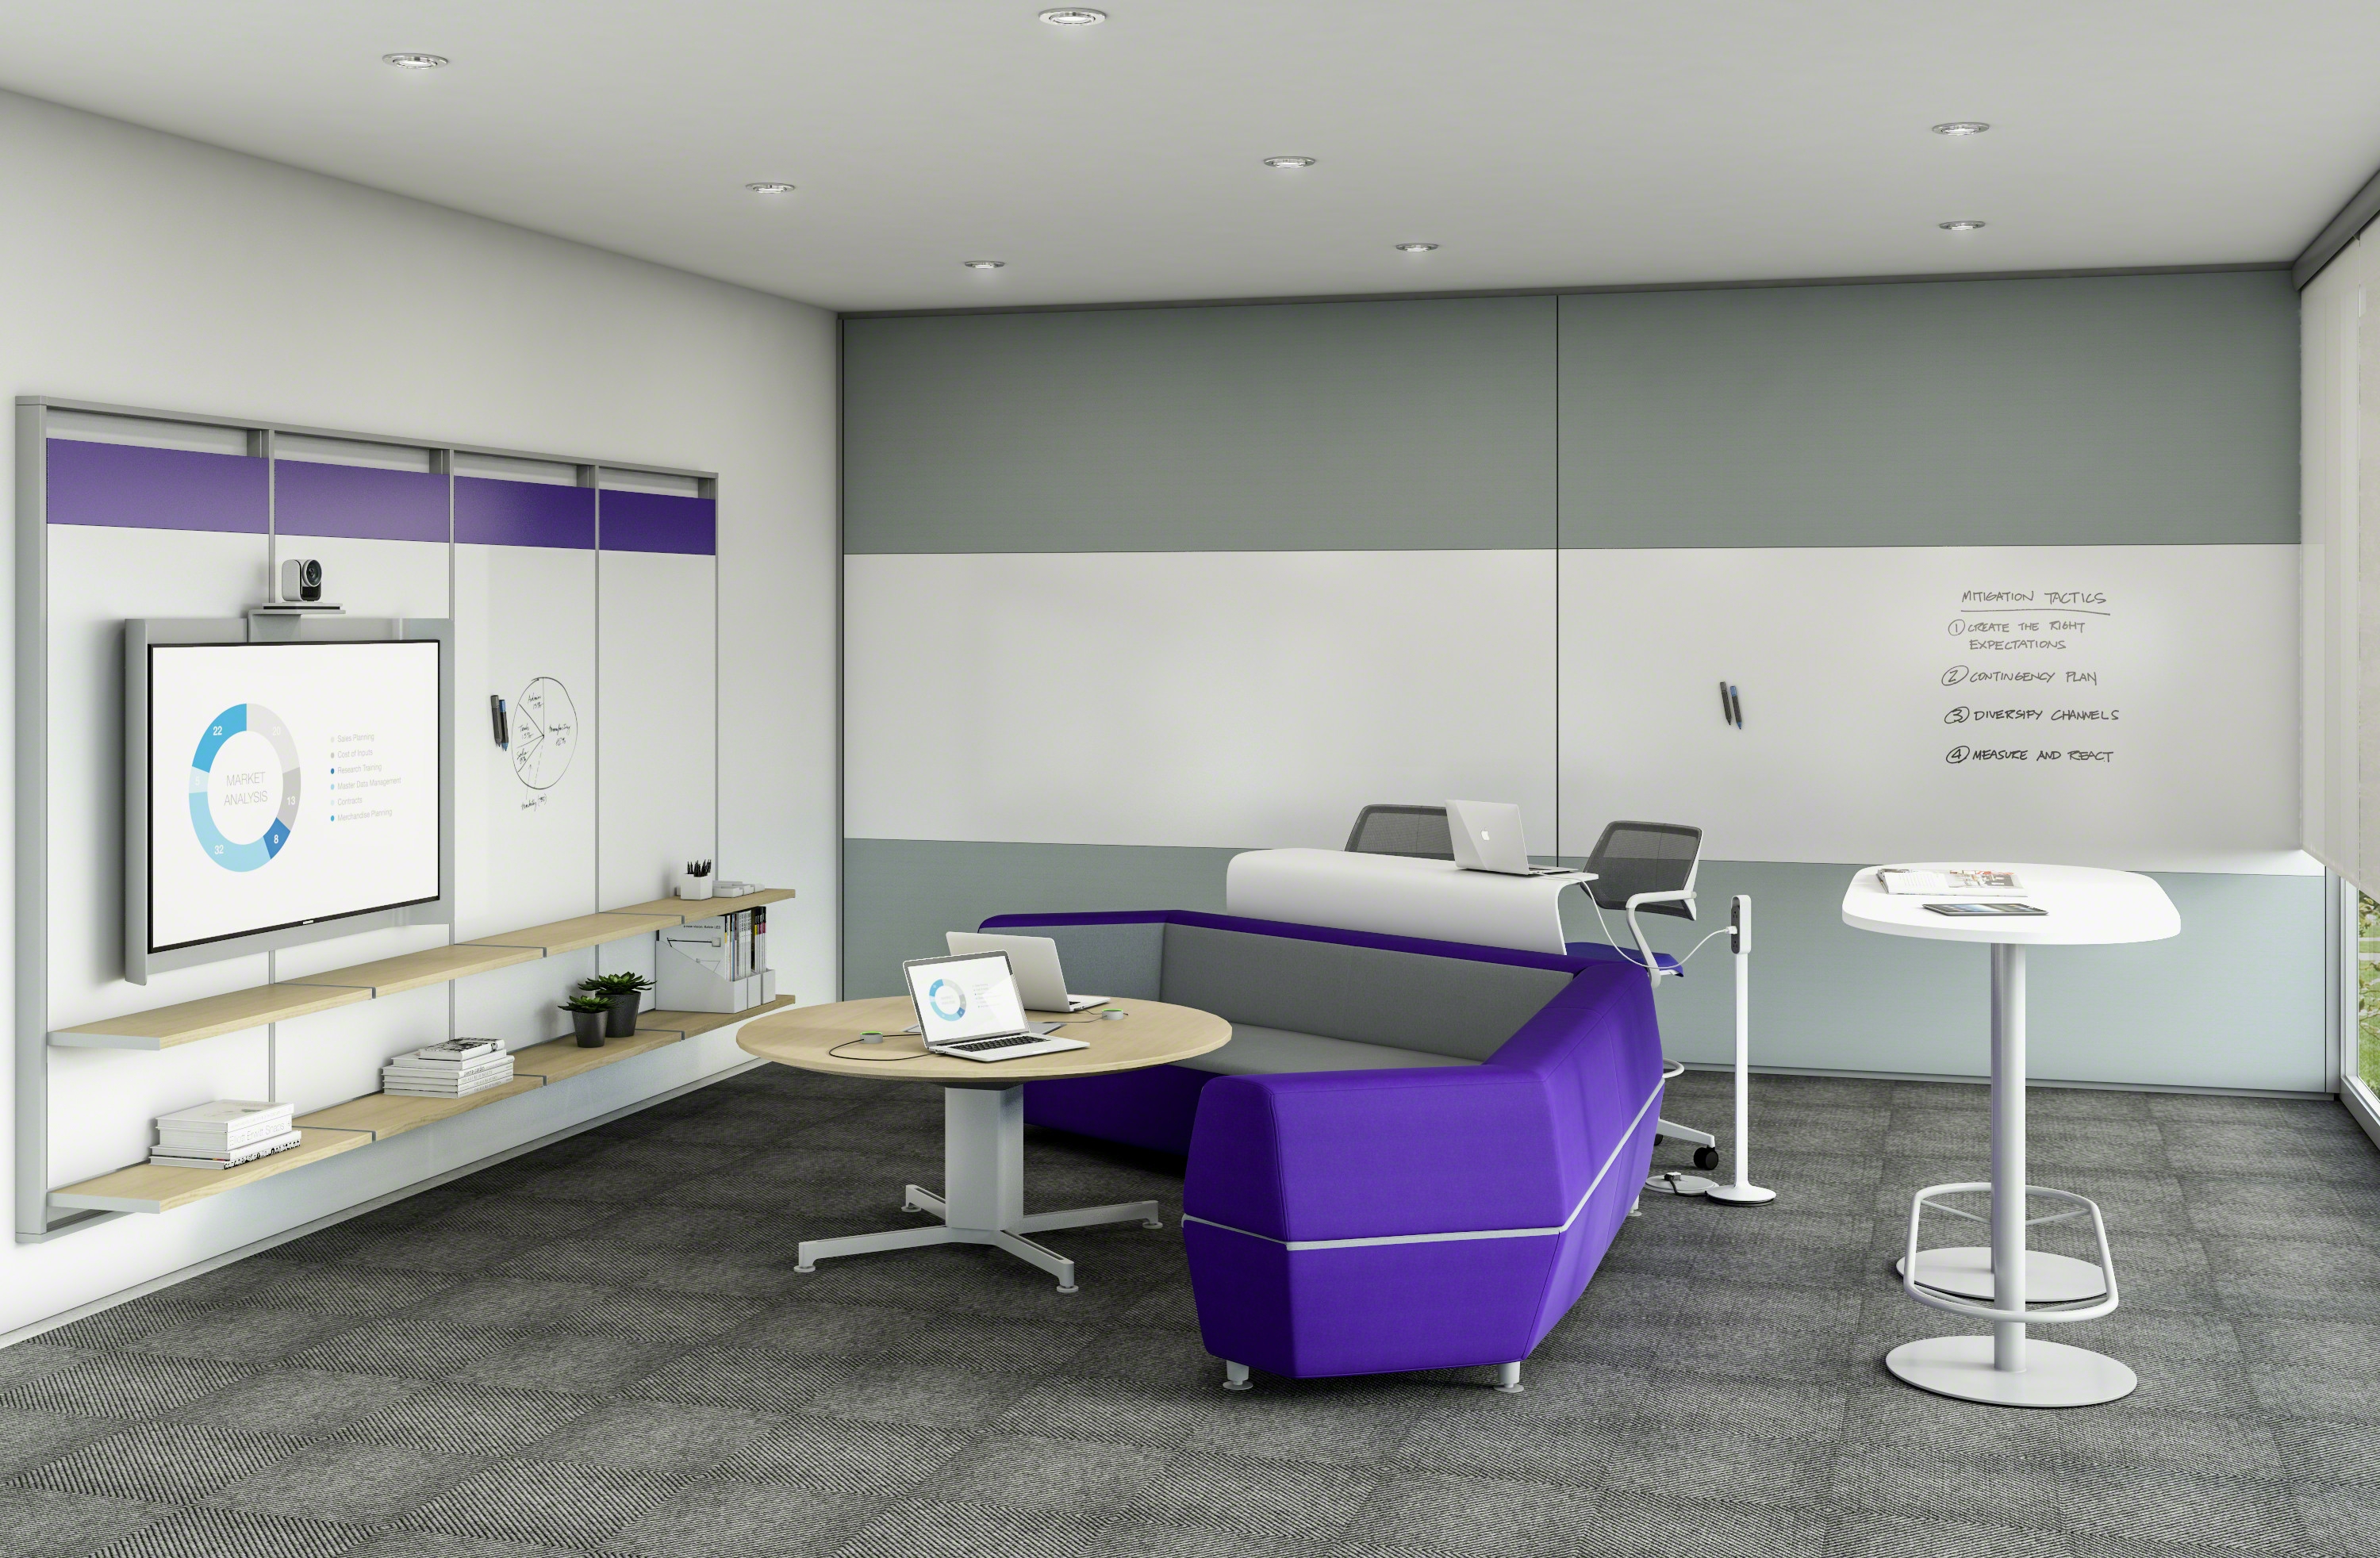 example of a meeting area in an office